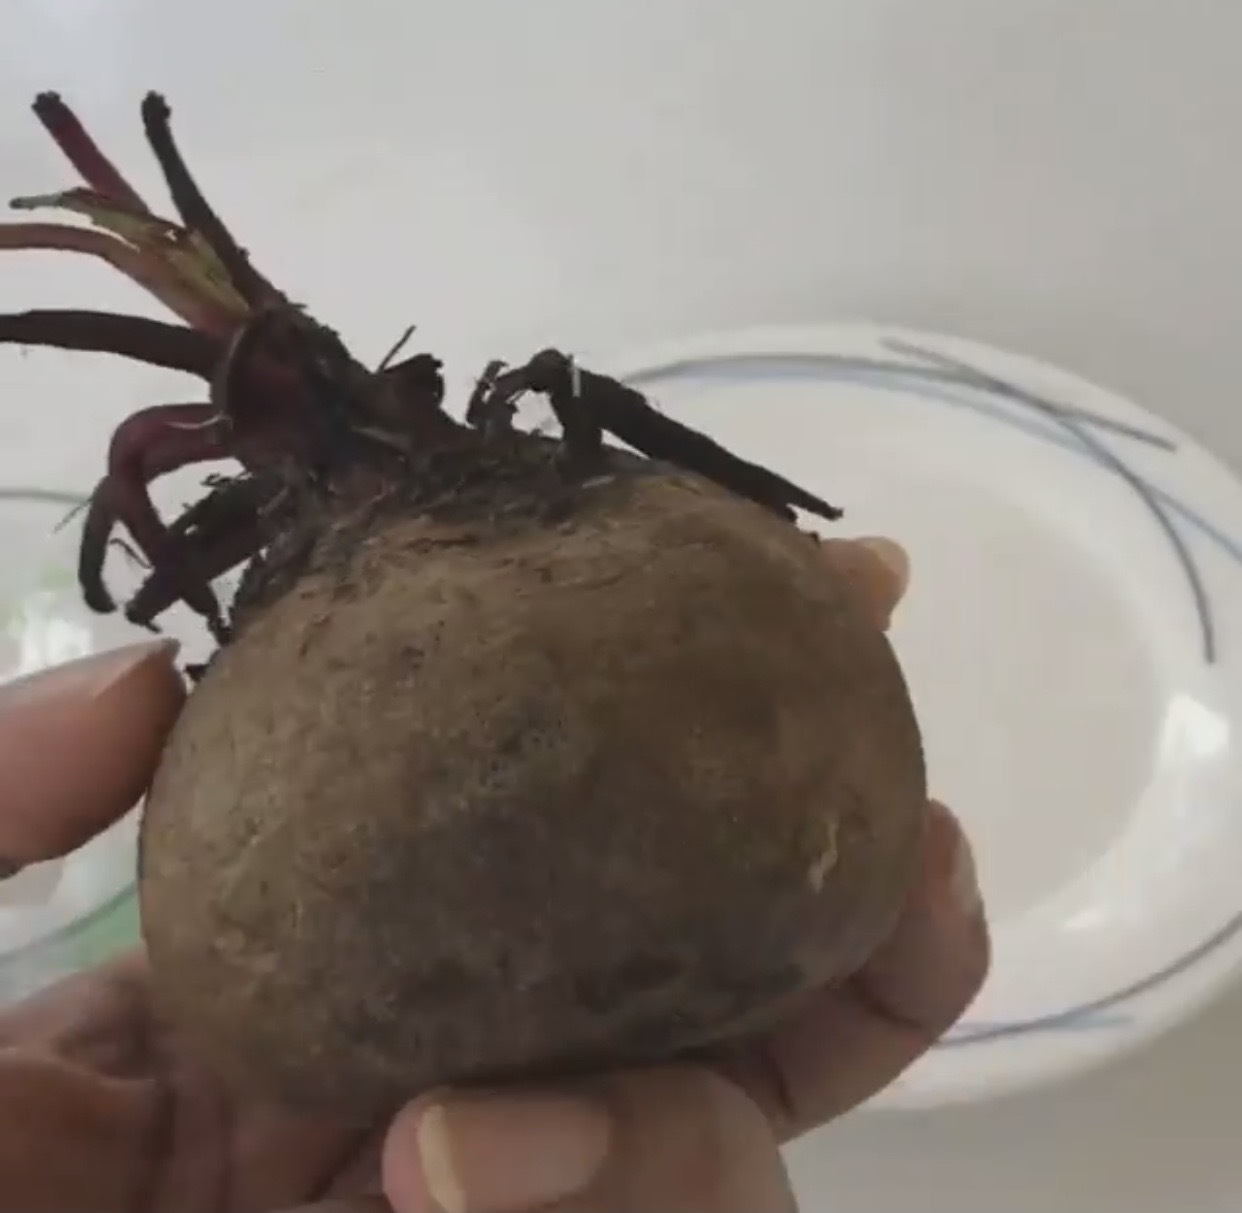 Take a store-bought beetroot and remove the dry leaves from the top to grow beetroot at home